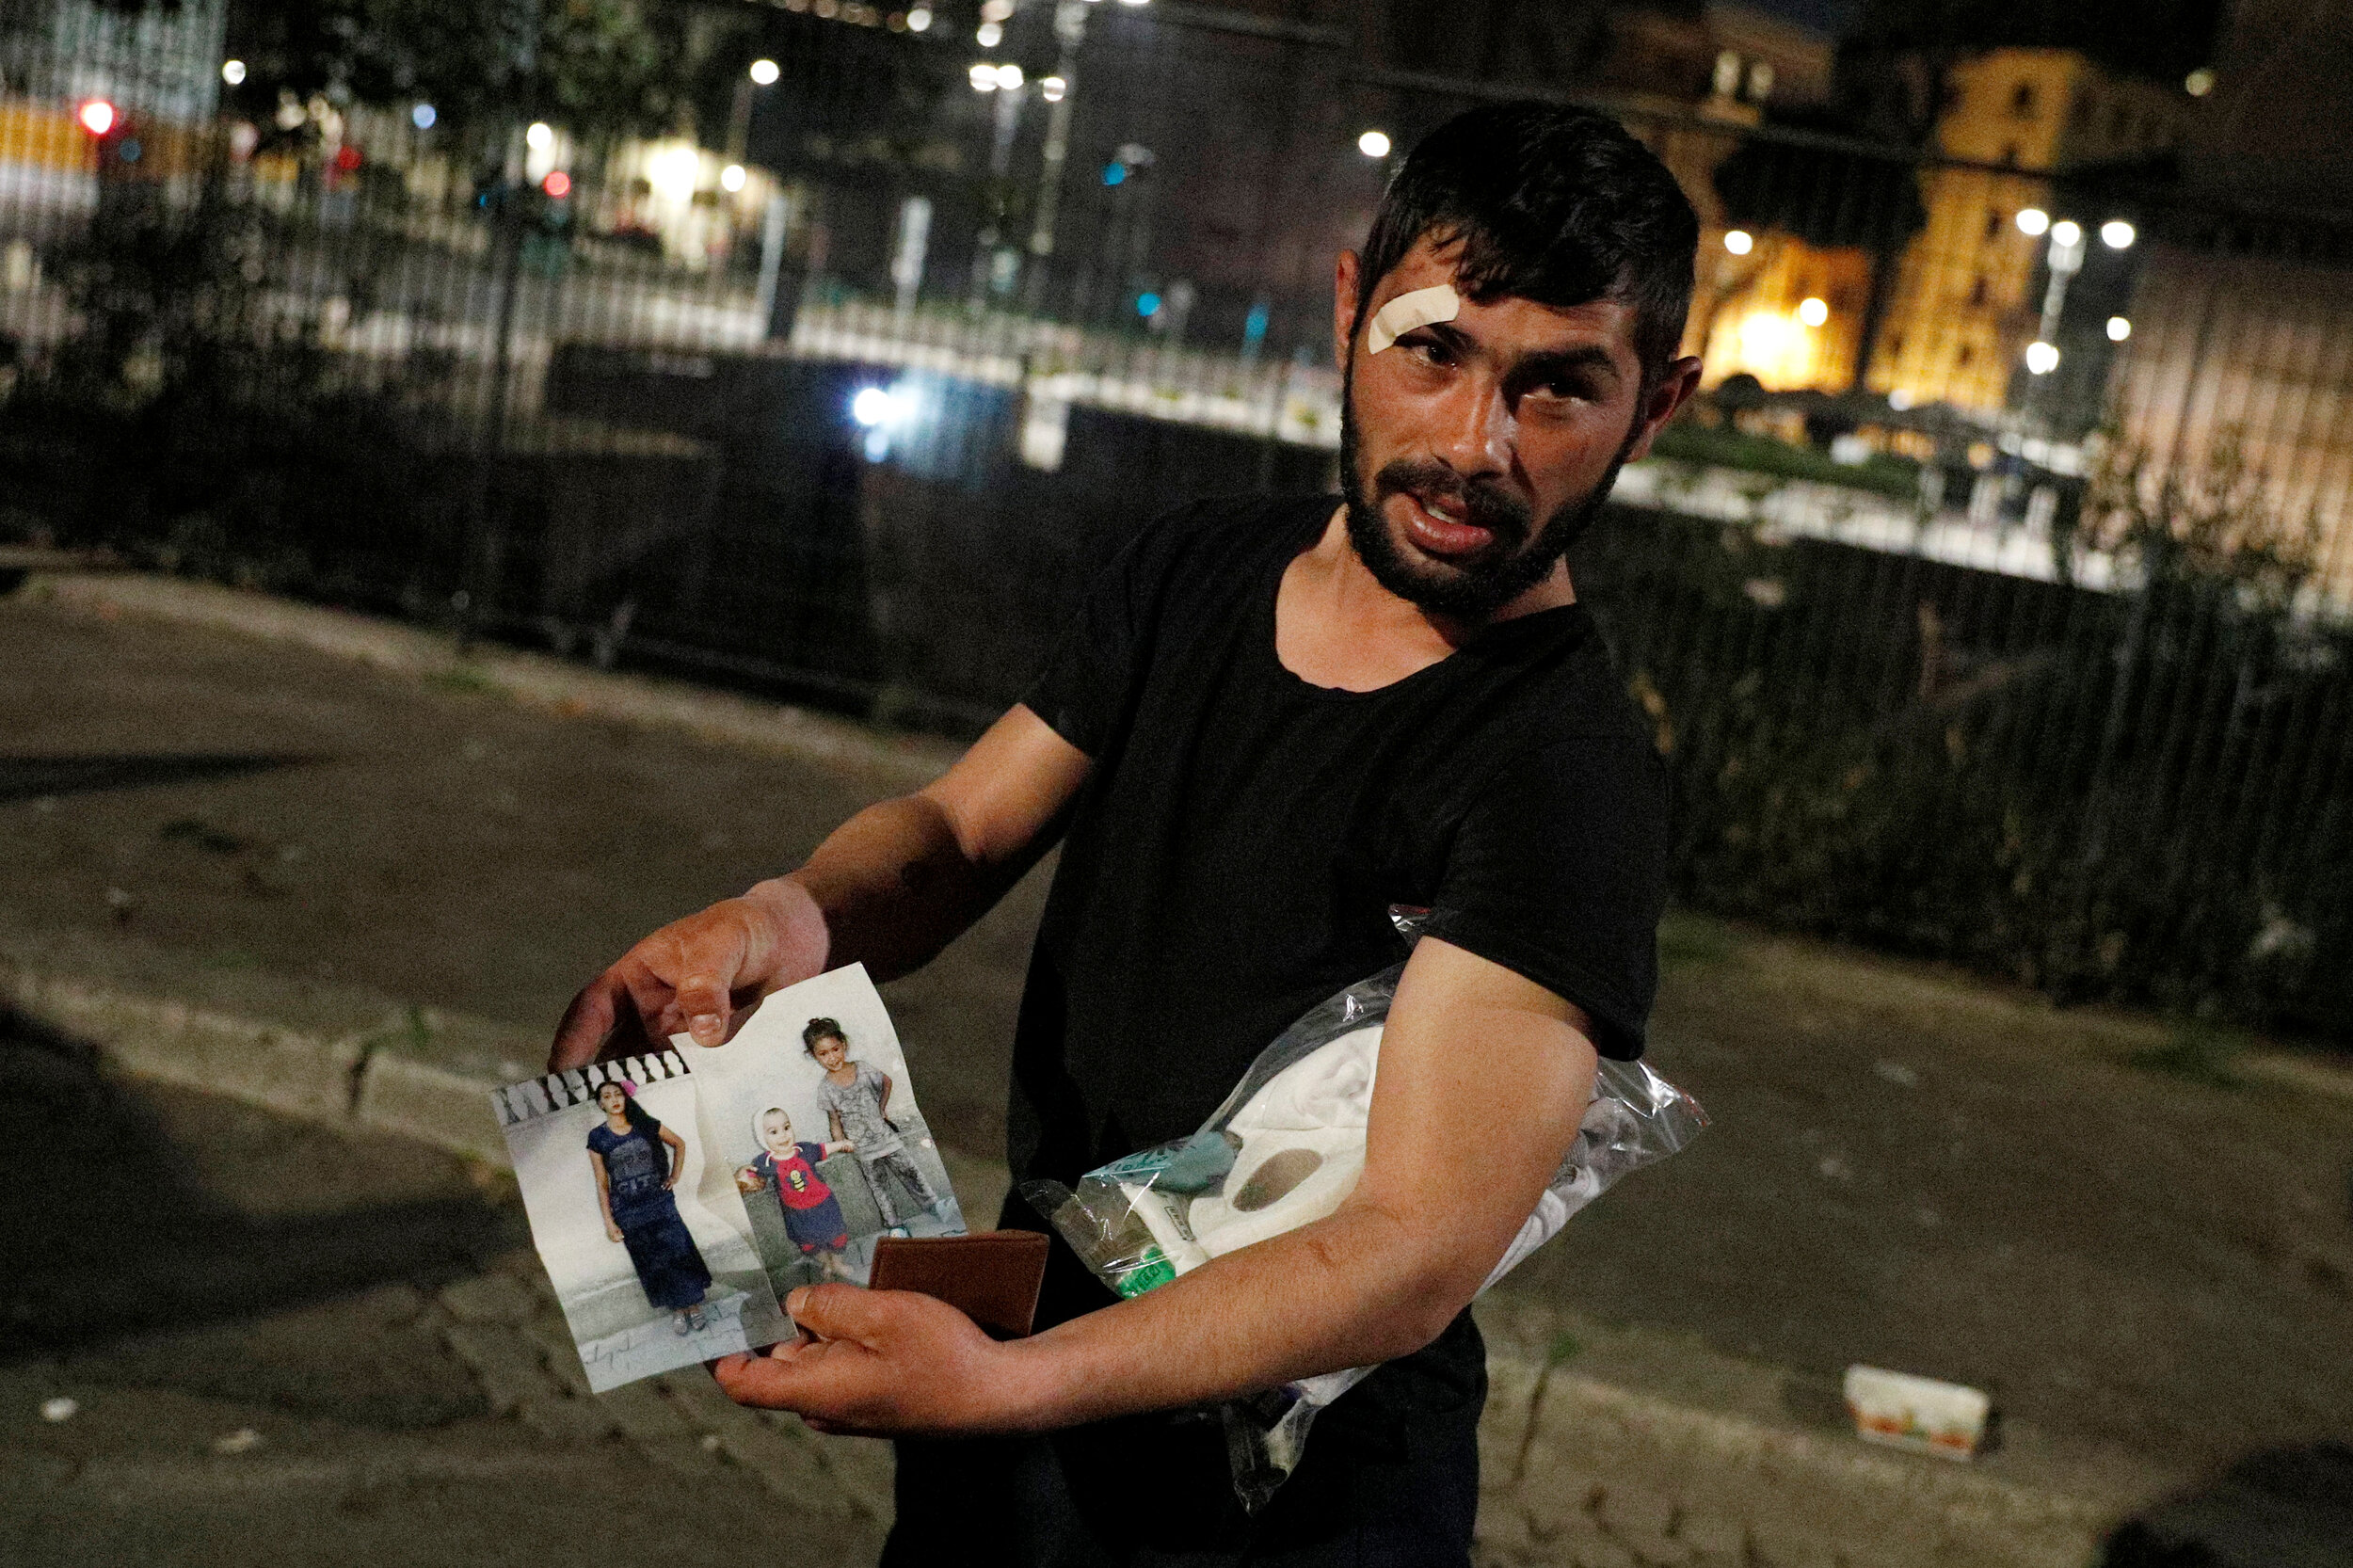  A homeless person shows pictures of his three daughters in Rome, Italy, March 17, 2020. Since the coronavirus crisis, Red Cross workers have been increasing their daily activities to meet the growing needs of the homeless in Rome.  